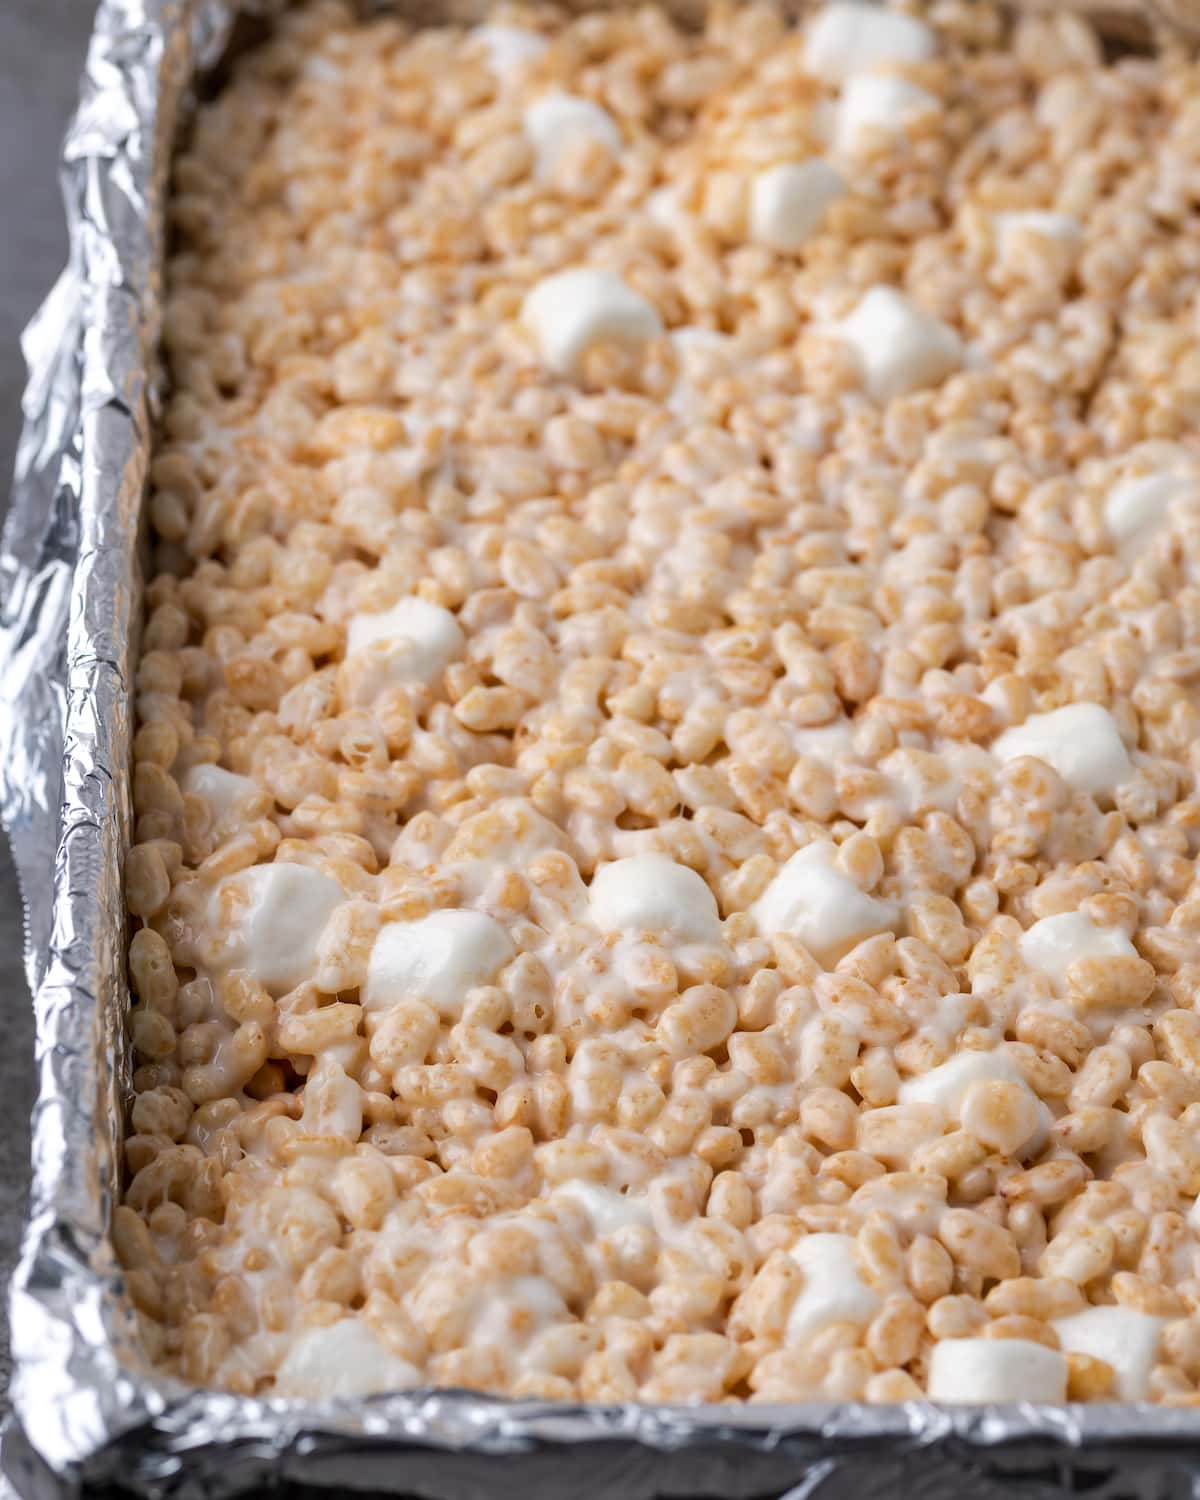 Rice Krispie treat mixture spread in a rectangular baking pan lined with foil.